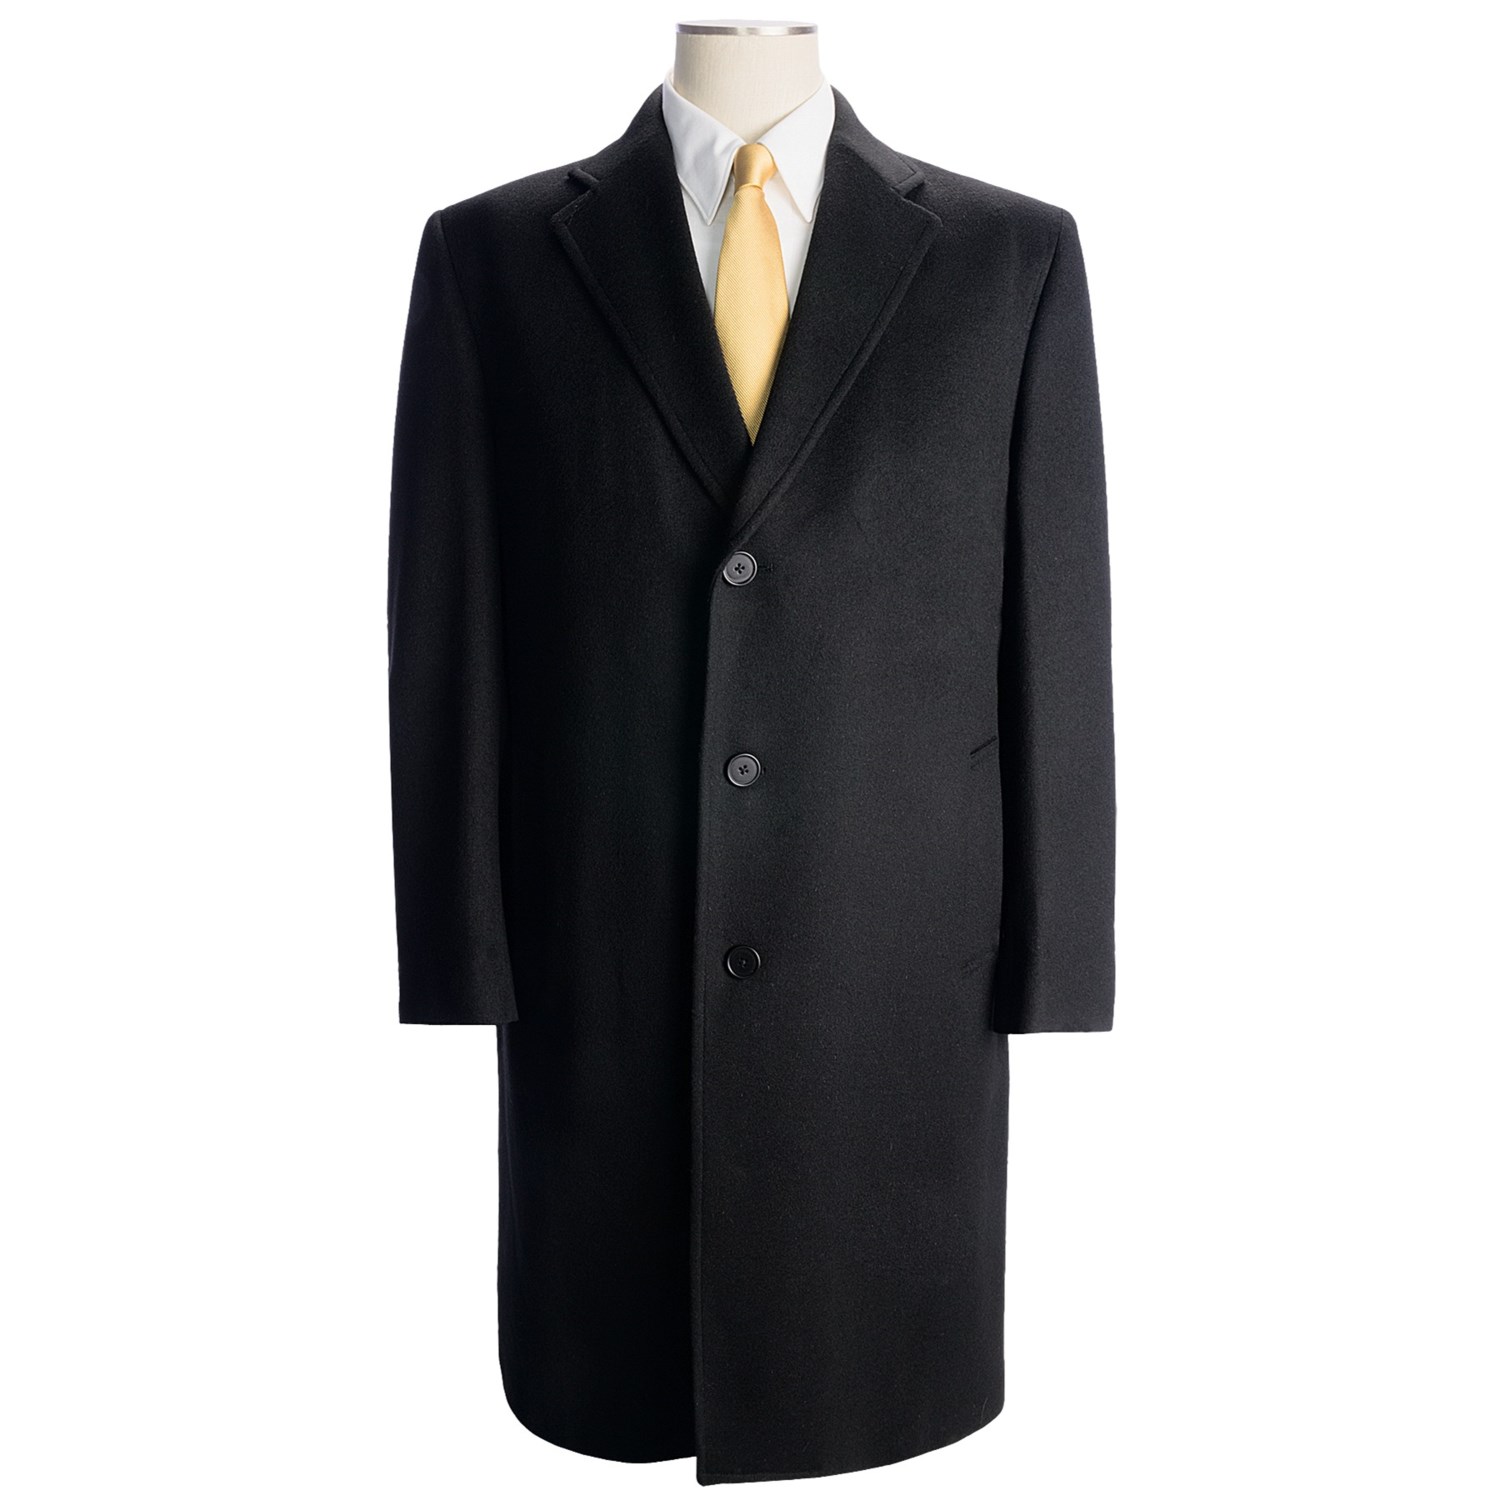 Wool-Cashmere Top Coat (For Men) 6528F - Save 62%